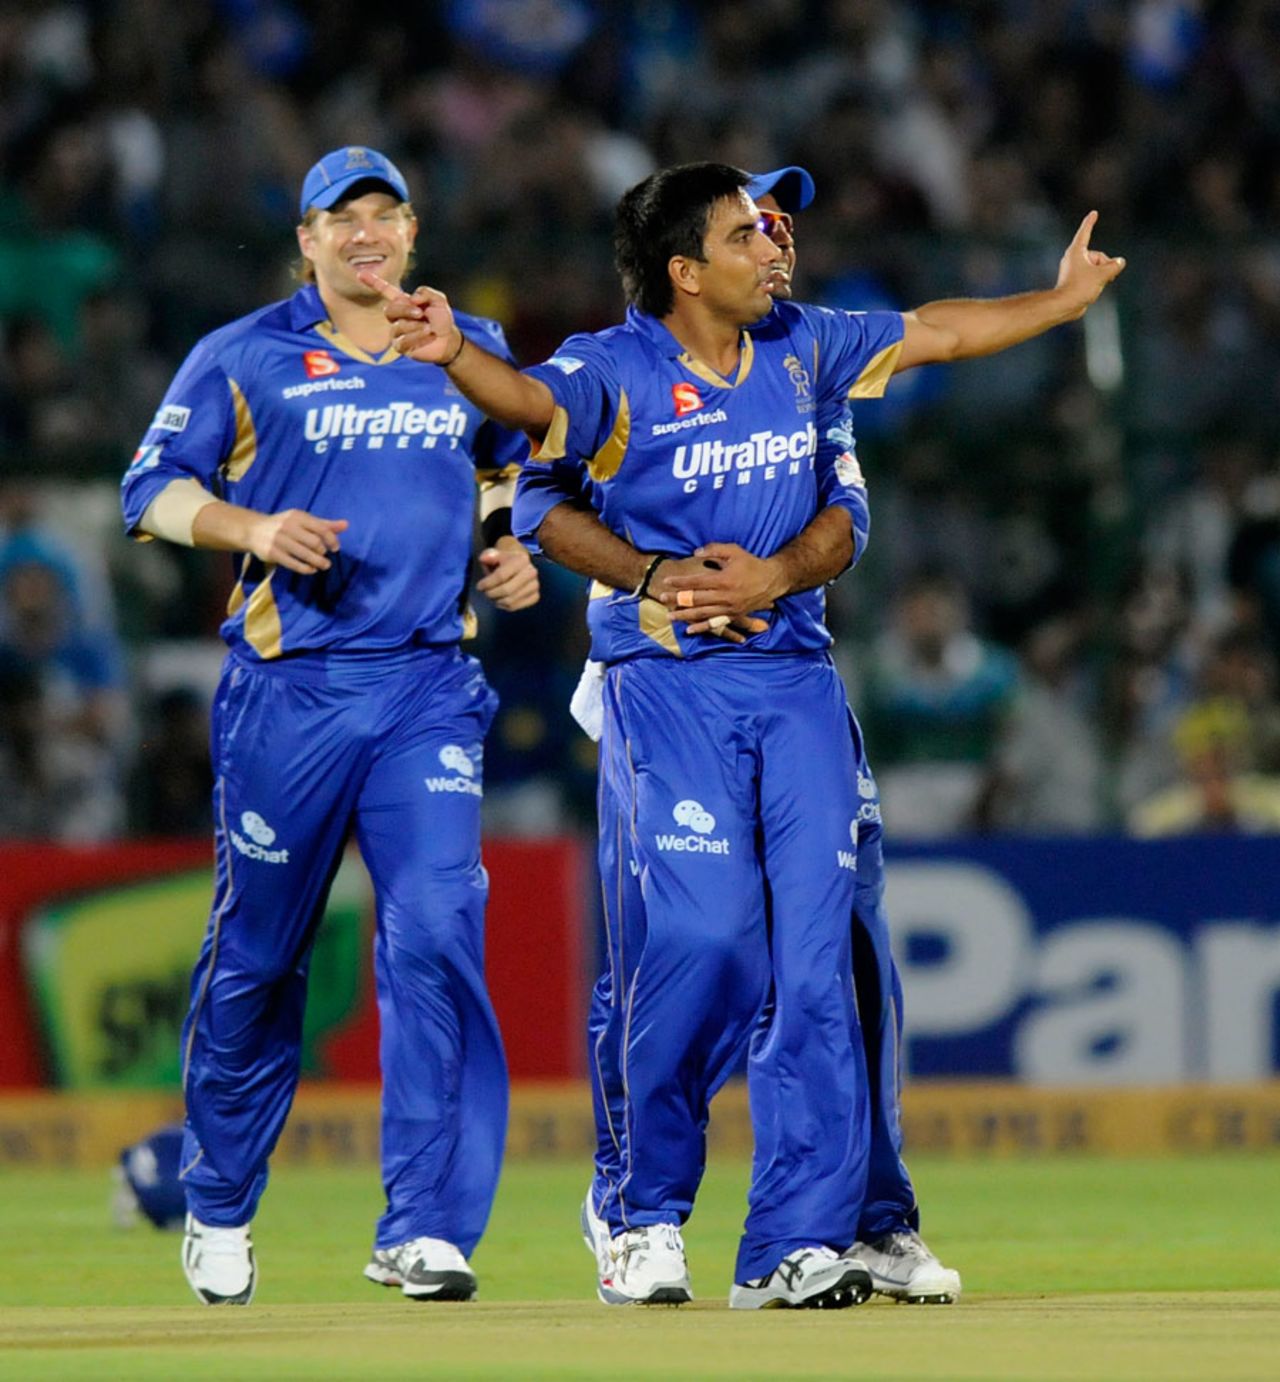 Vikramjeet Malik is embraced by team-mates after removing Dwayne Smith, Mumbai Indians v Rajasthan Royals, Champions League 2013, Mohali, September 21, 2013